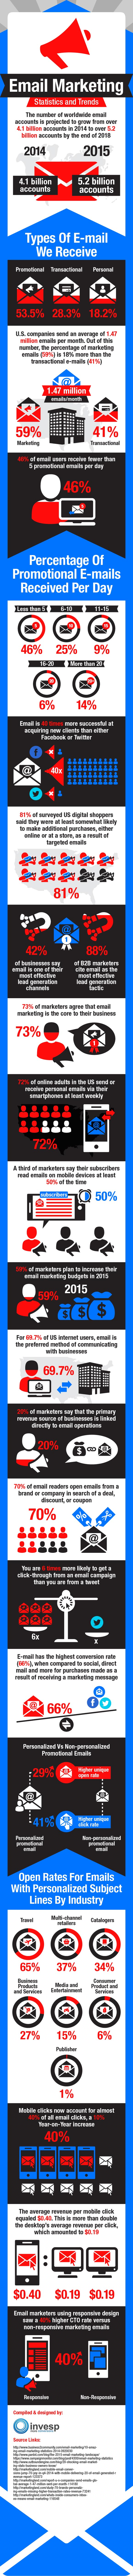 Email Marketing Statistics Trends Small Business